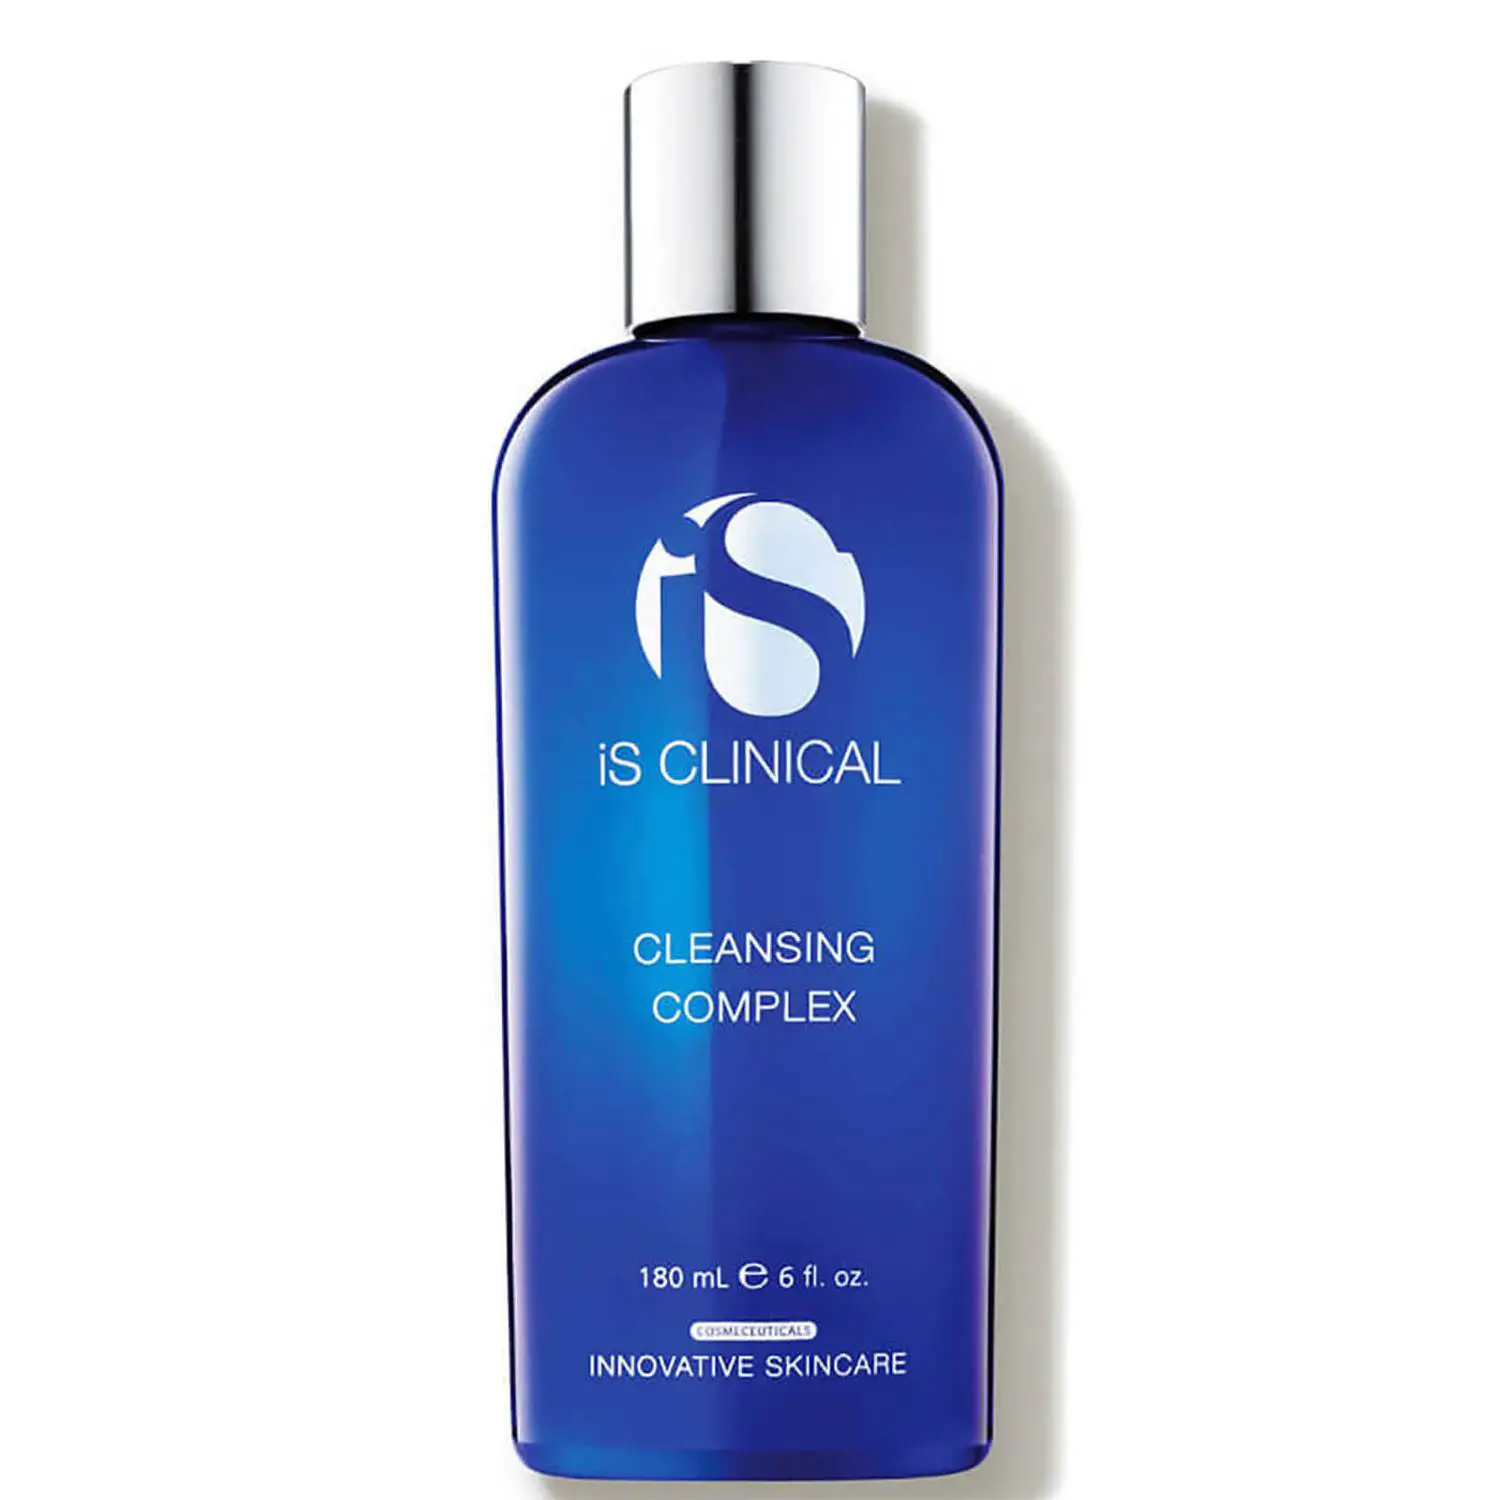 is clinical cleansing complex skincare face wash